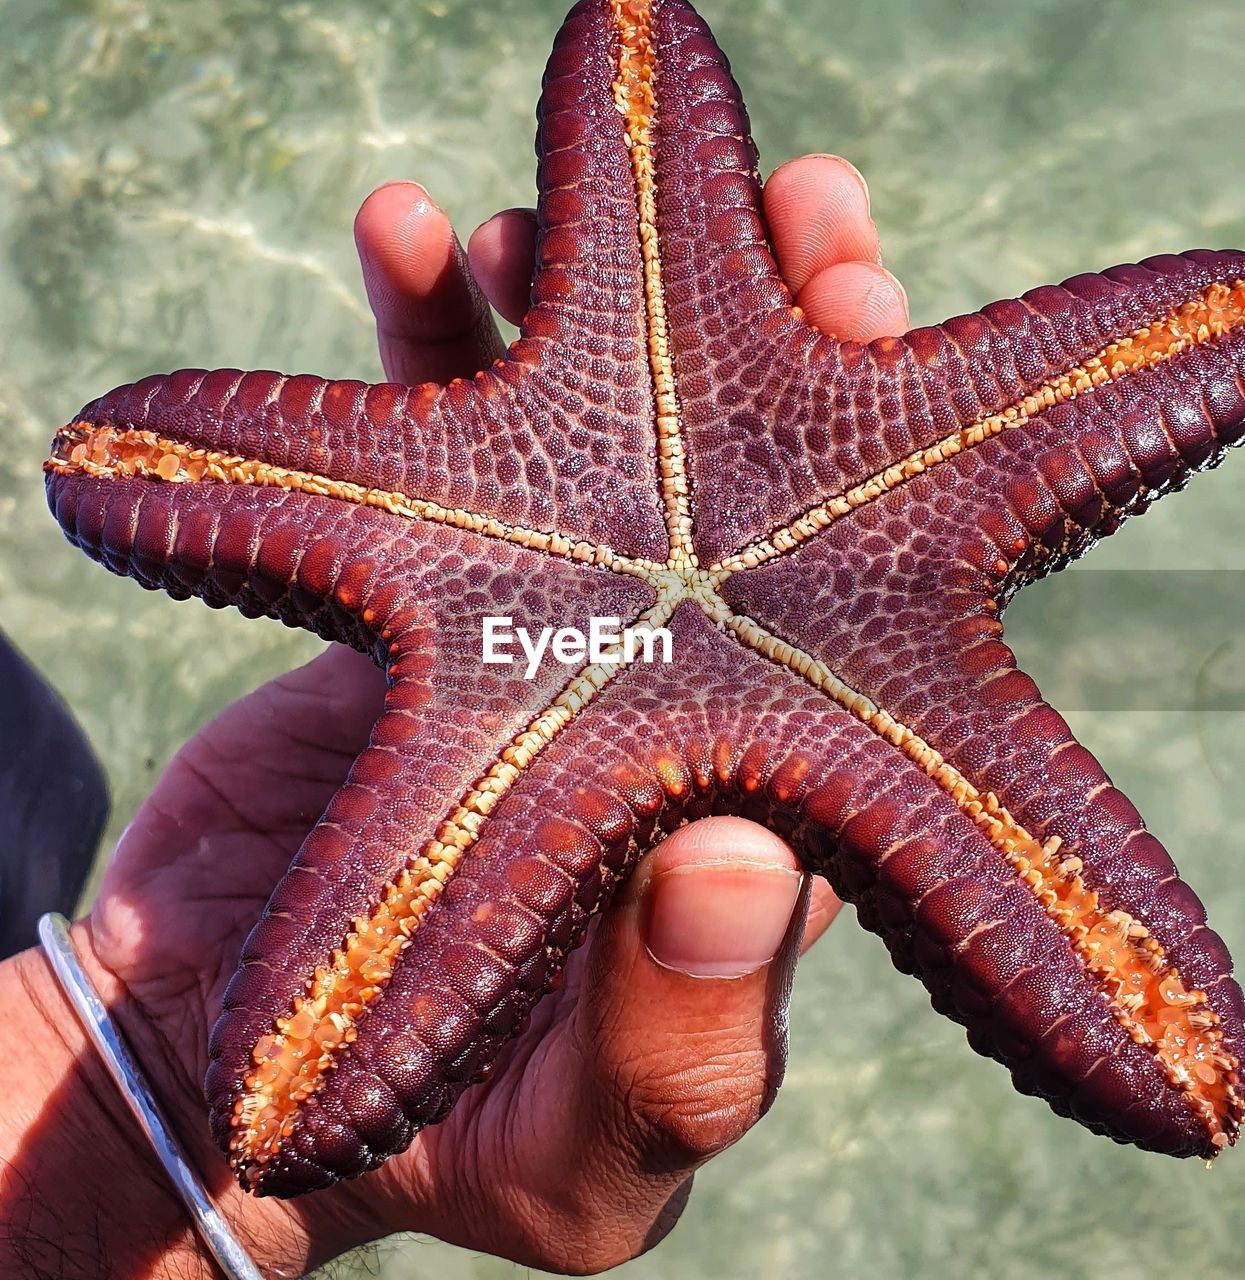 There is star everywhere, this one from the world of sea